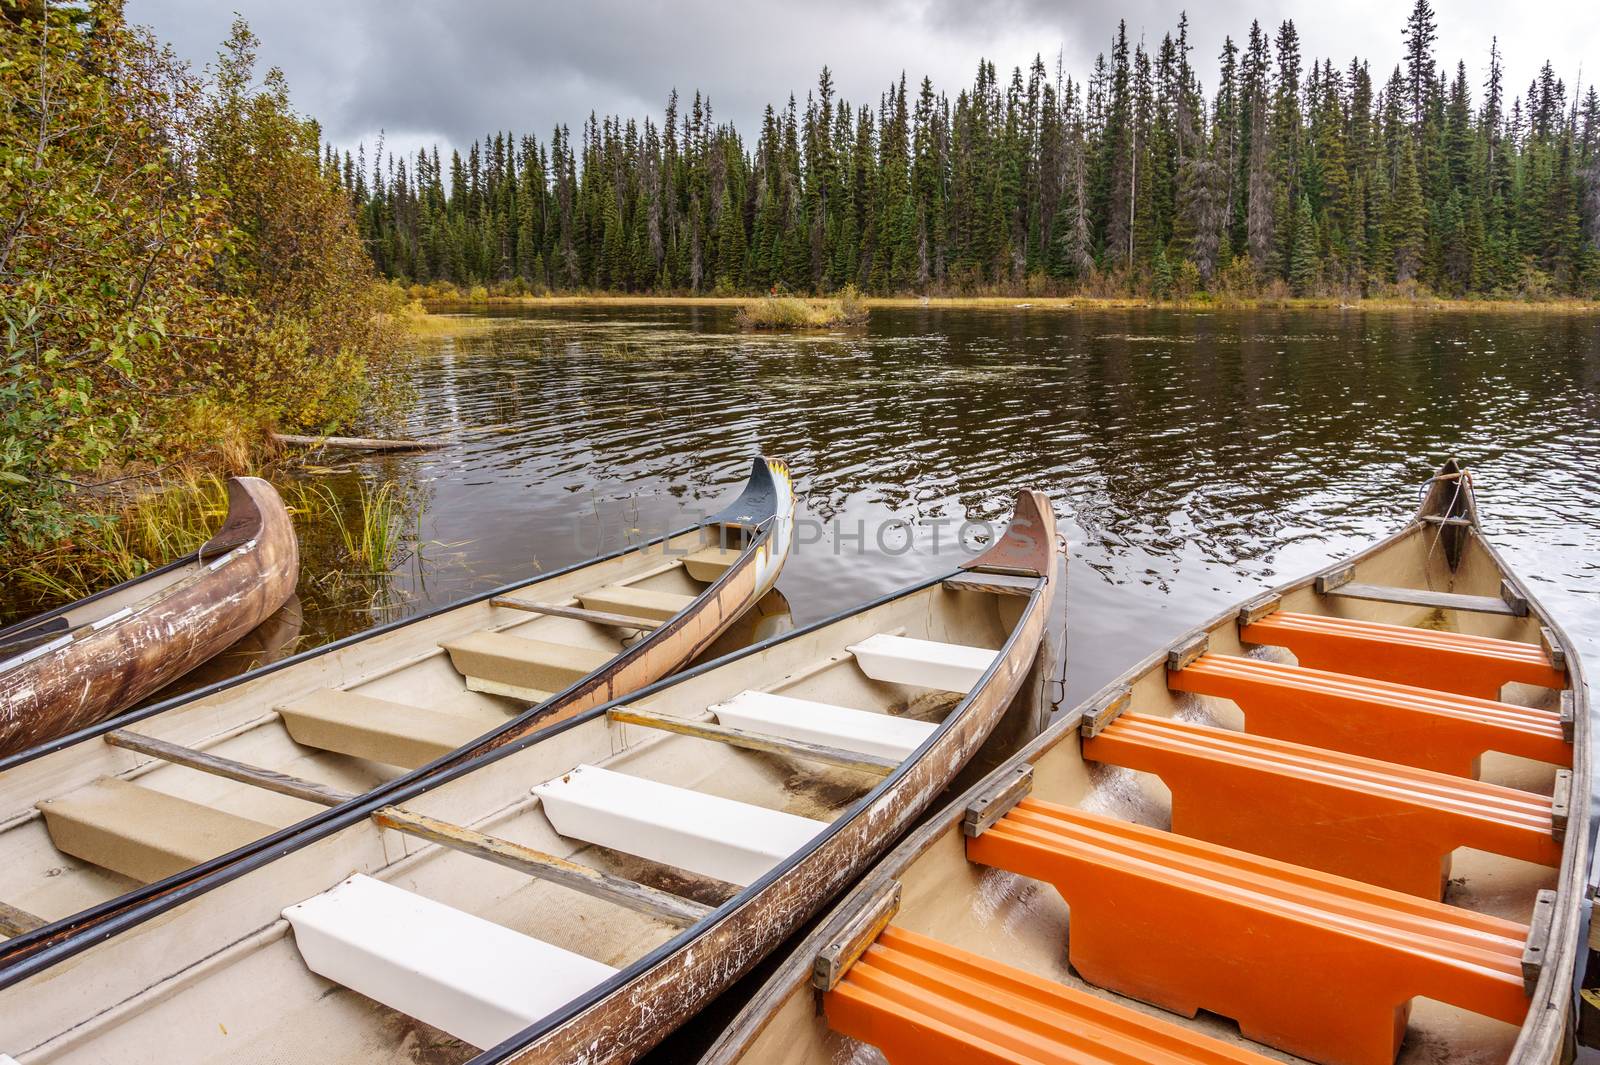 Canoes moored in McGillivray Lake by hpbfotos